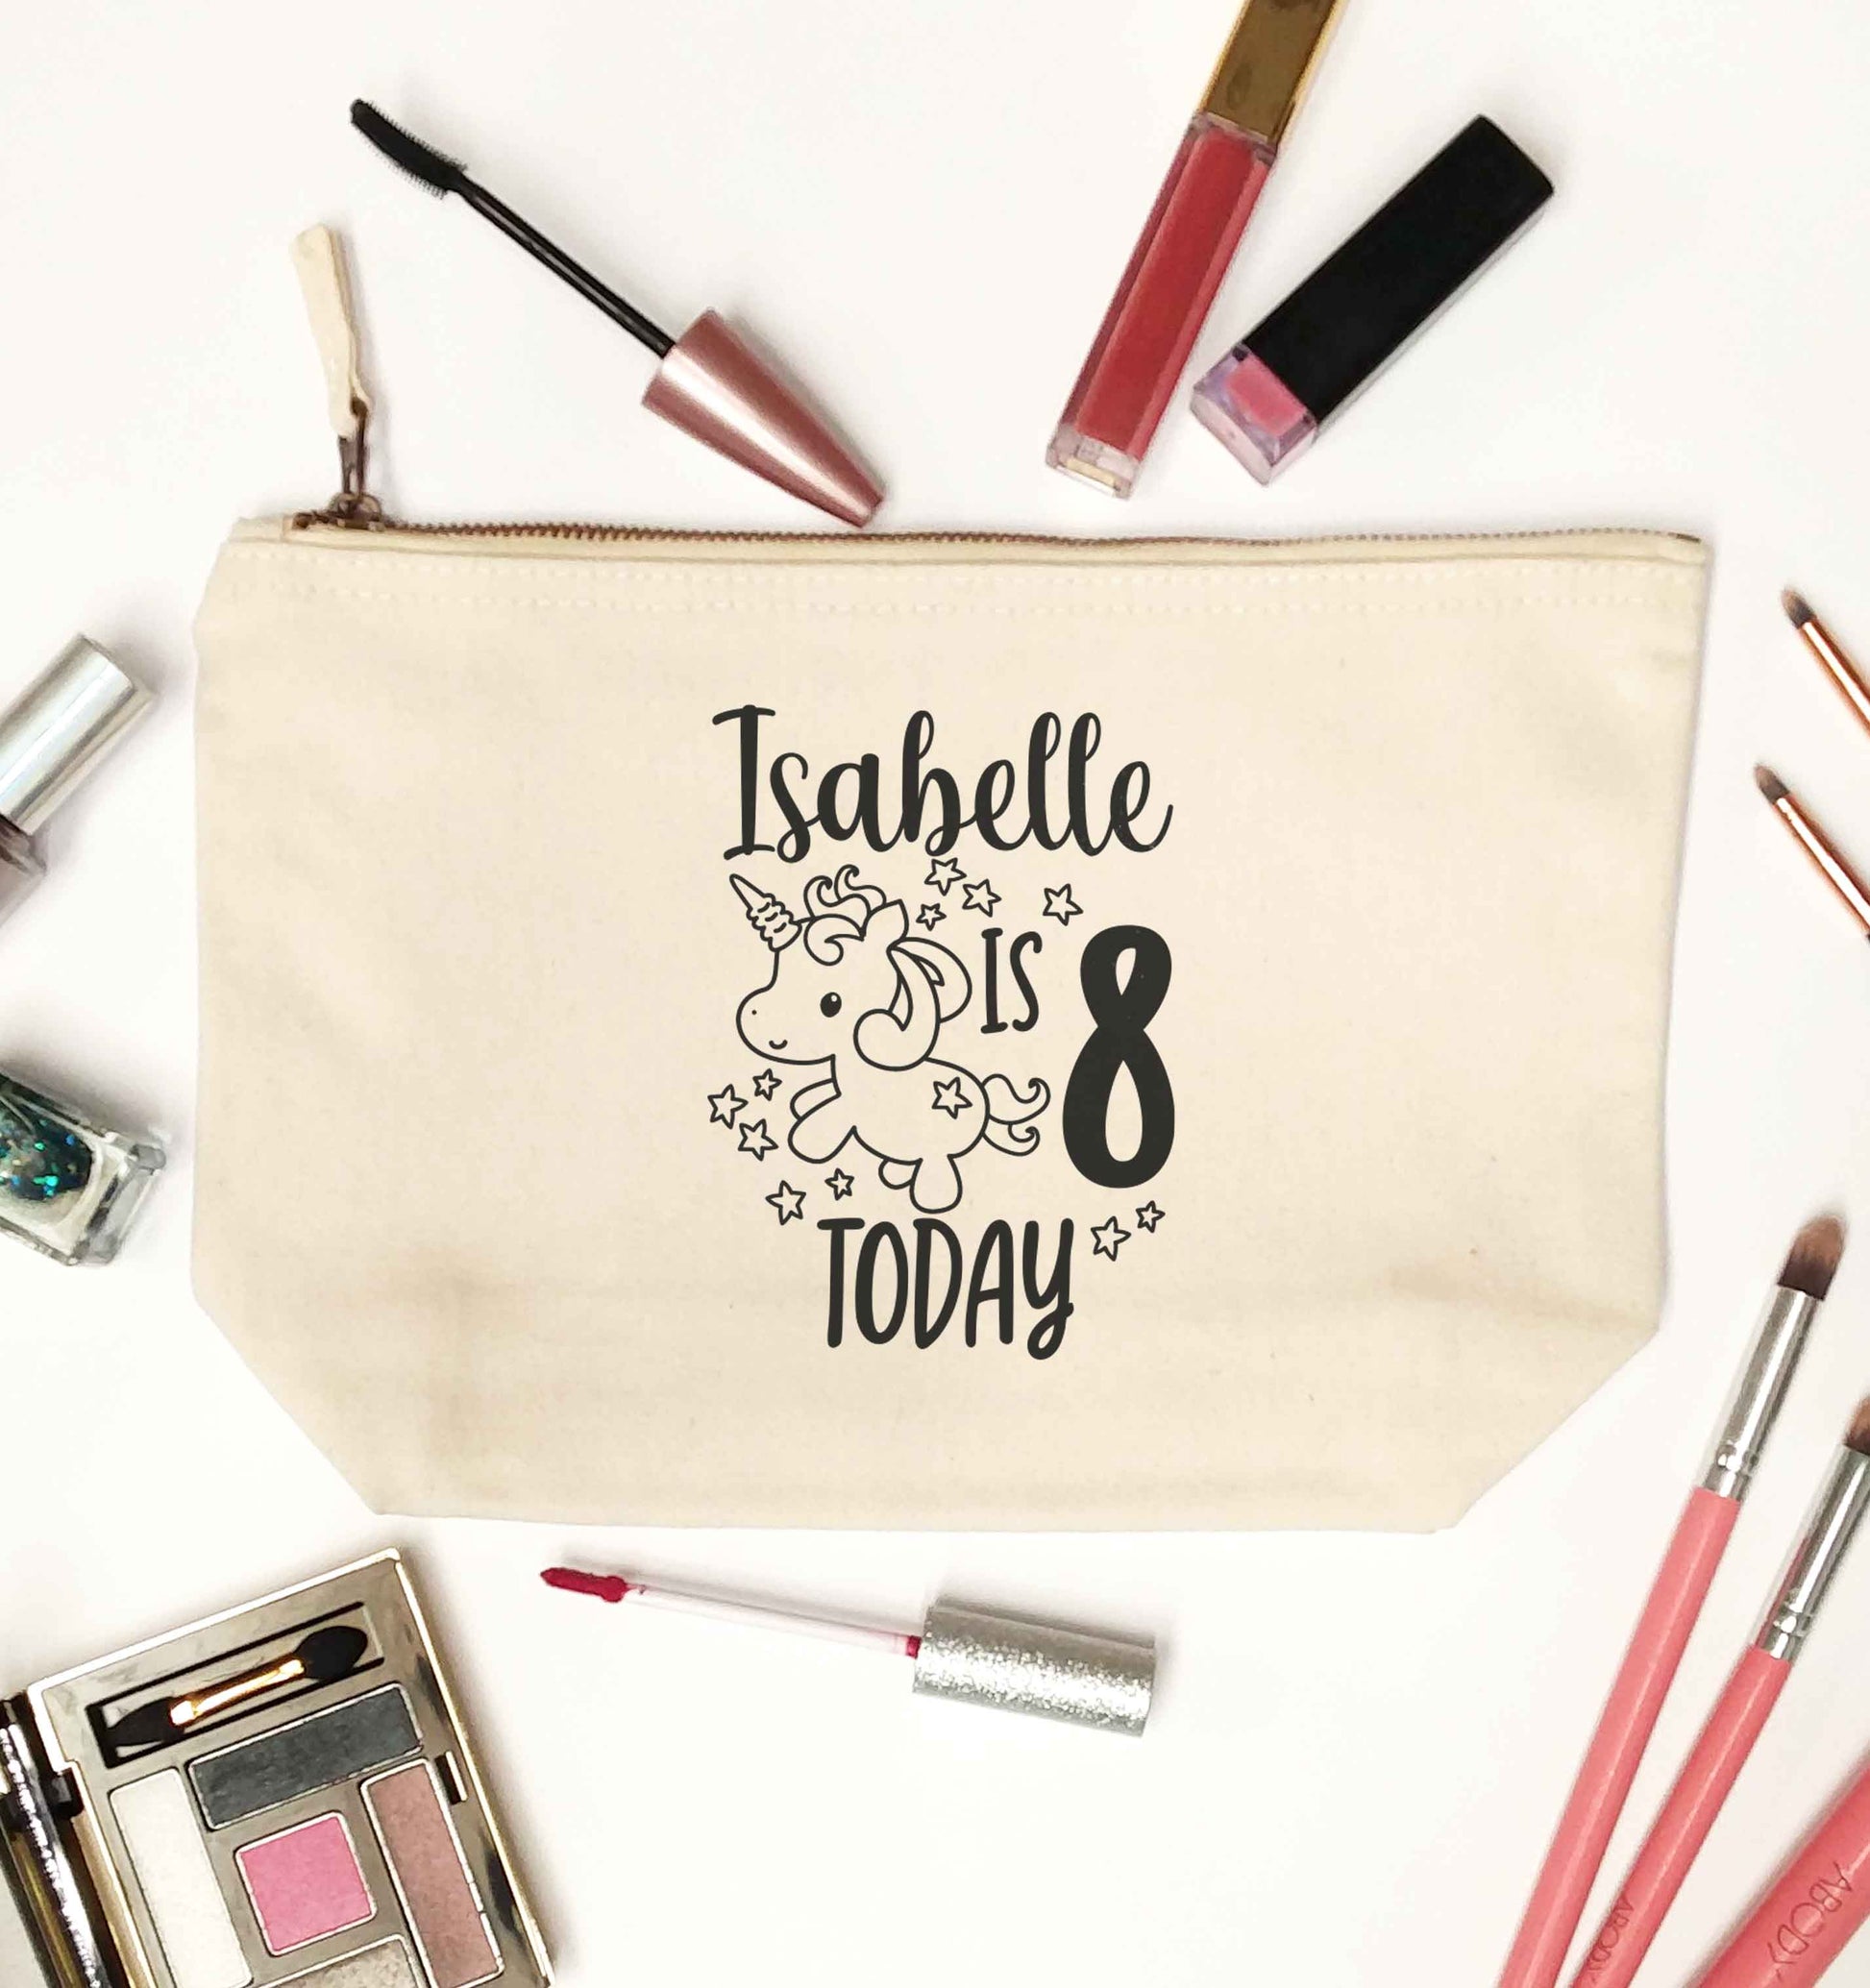 Today I am - Personalise with any name or age! Birthday unicorn natural makeup bag